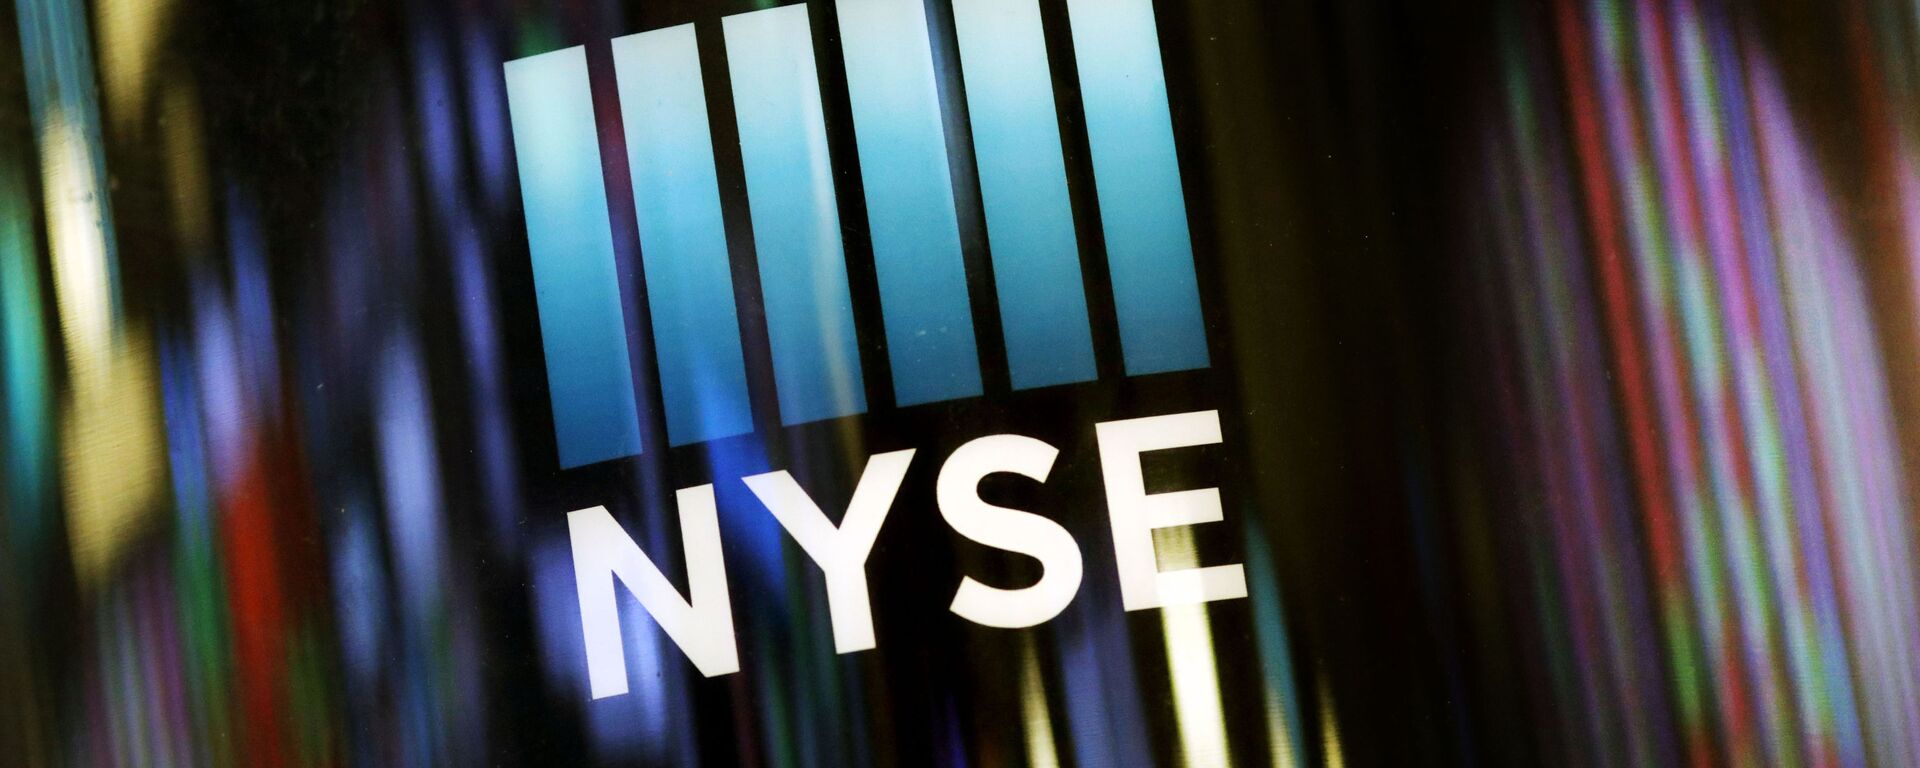 FILE - In this May 13, 2019 file photo, the NYSE logo is displayed at the New York Stock Exchange. U.S. stocks edged higher in early trading on Wall Street Monday, June 17, following two weeks of gains. (AP Photo/Mark Lennihan, File) - Sputnik International, 1920, 24.09.2021